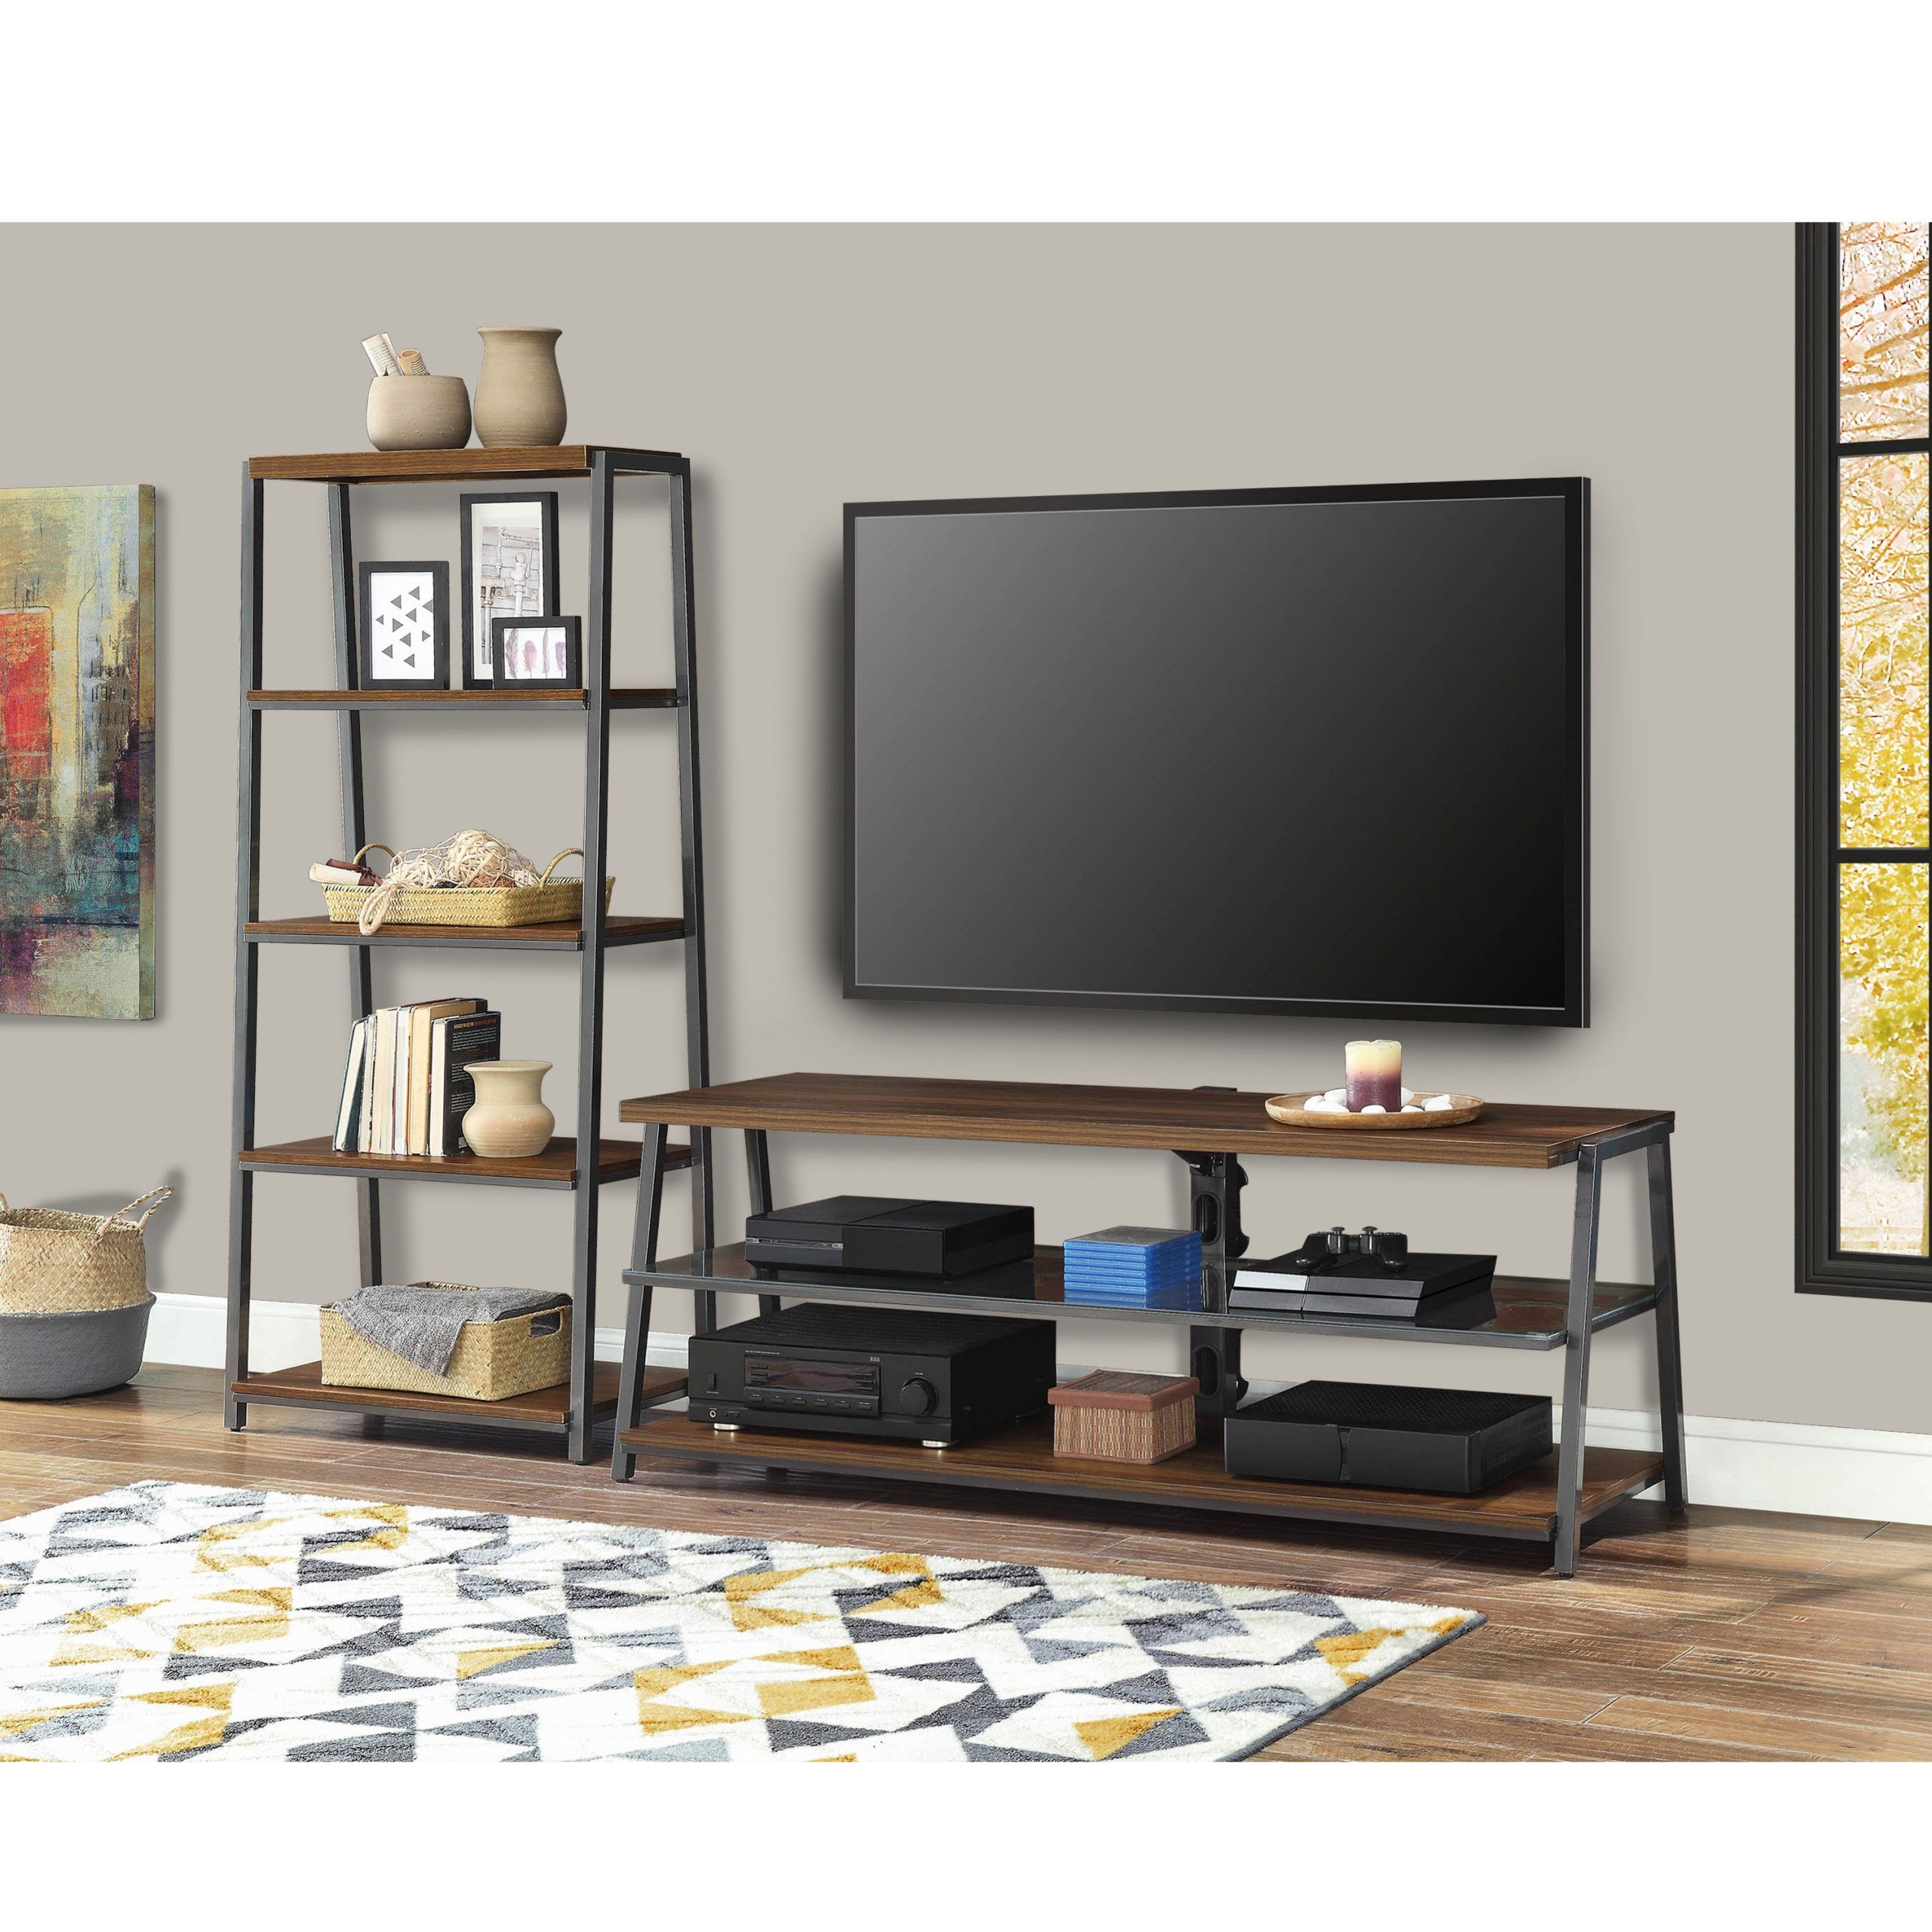 Mainstays Arris Tv Stand For 70" Flat Panel Tvs And 4 Intended For Mainstays Arris 3 In 1 Tv Stands In Canyon Walnut Finish (View 8 of 20)